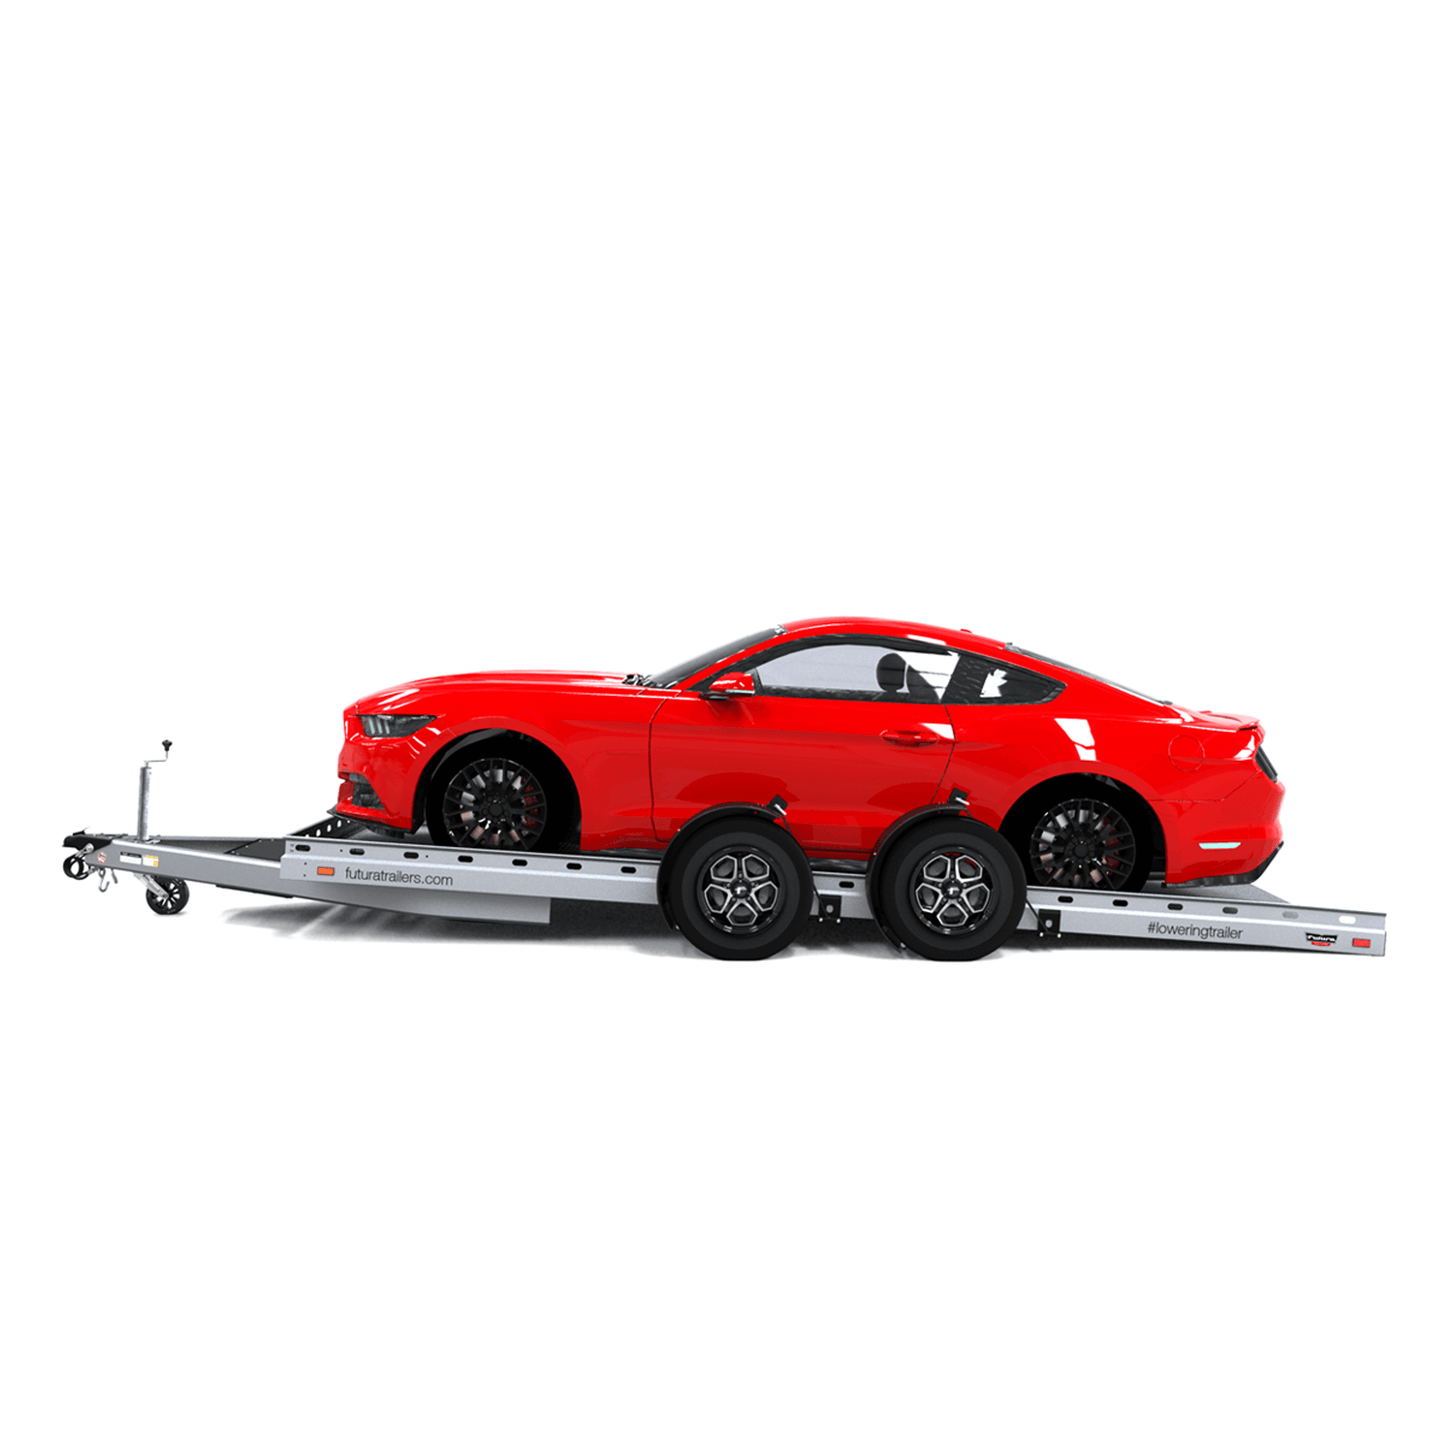 Super Sport Lowering Trailer from $19,495*